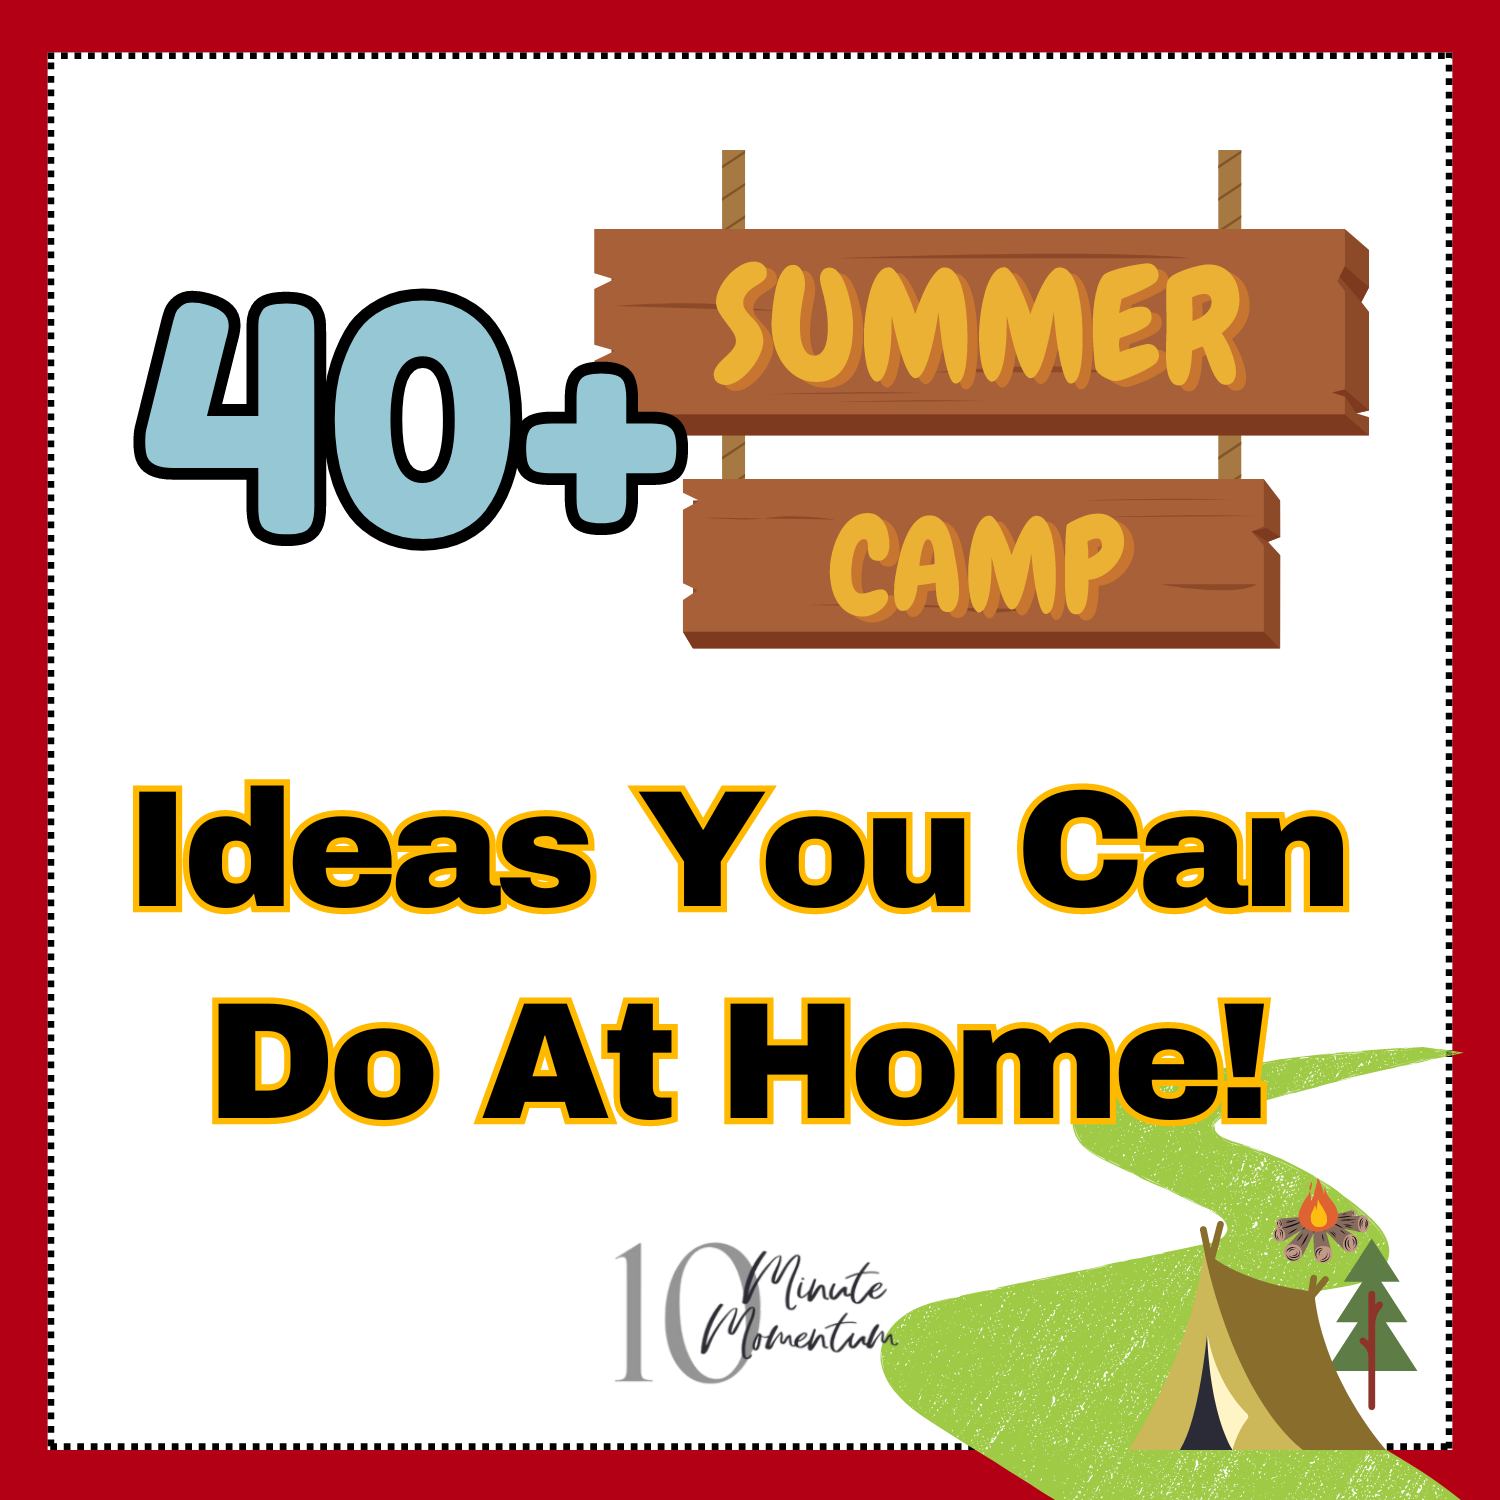 Fun Summer Camp Ideas You Can Do At Home with Kids